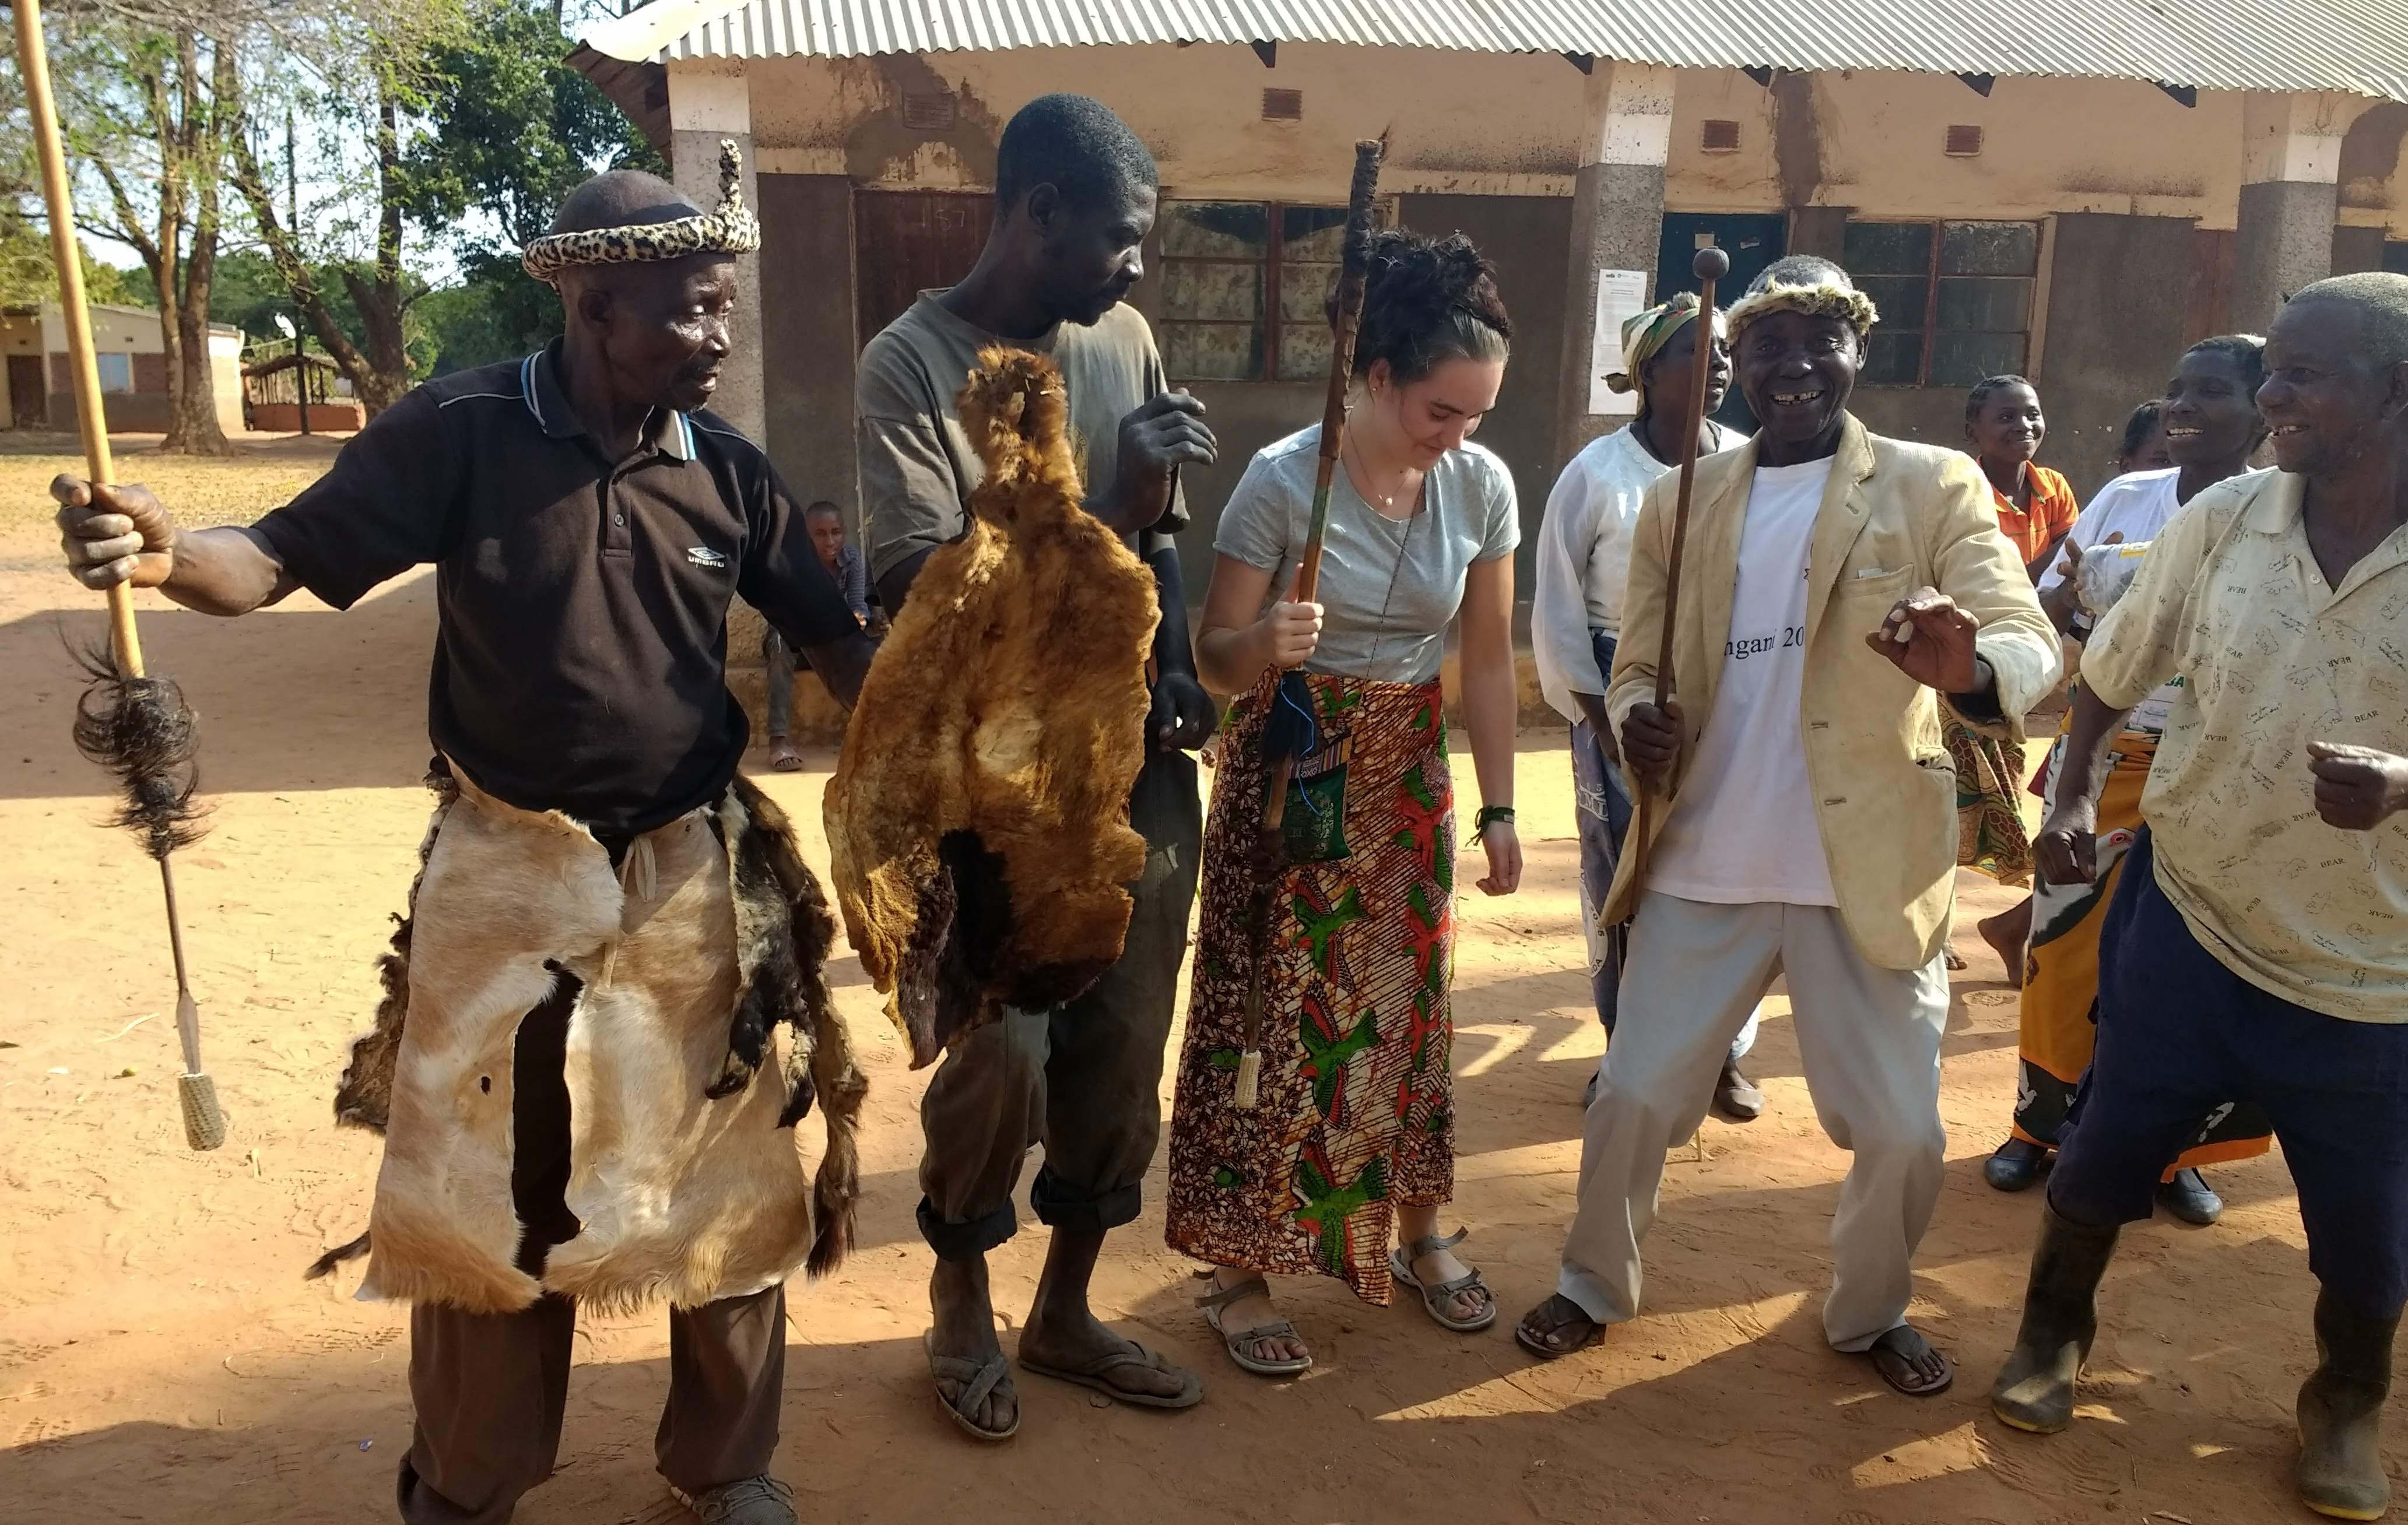 One of Sophia’s welcomes to Egichikeni village was given by these traditional dancers. They invited Sophia to join their dance as we awaited an official meeting with Chief Magodi, who welcomed Sophia to his chiefdom.